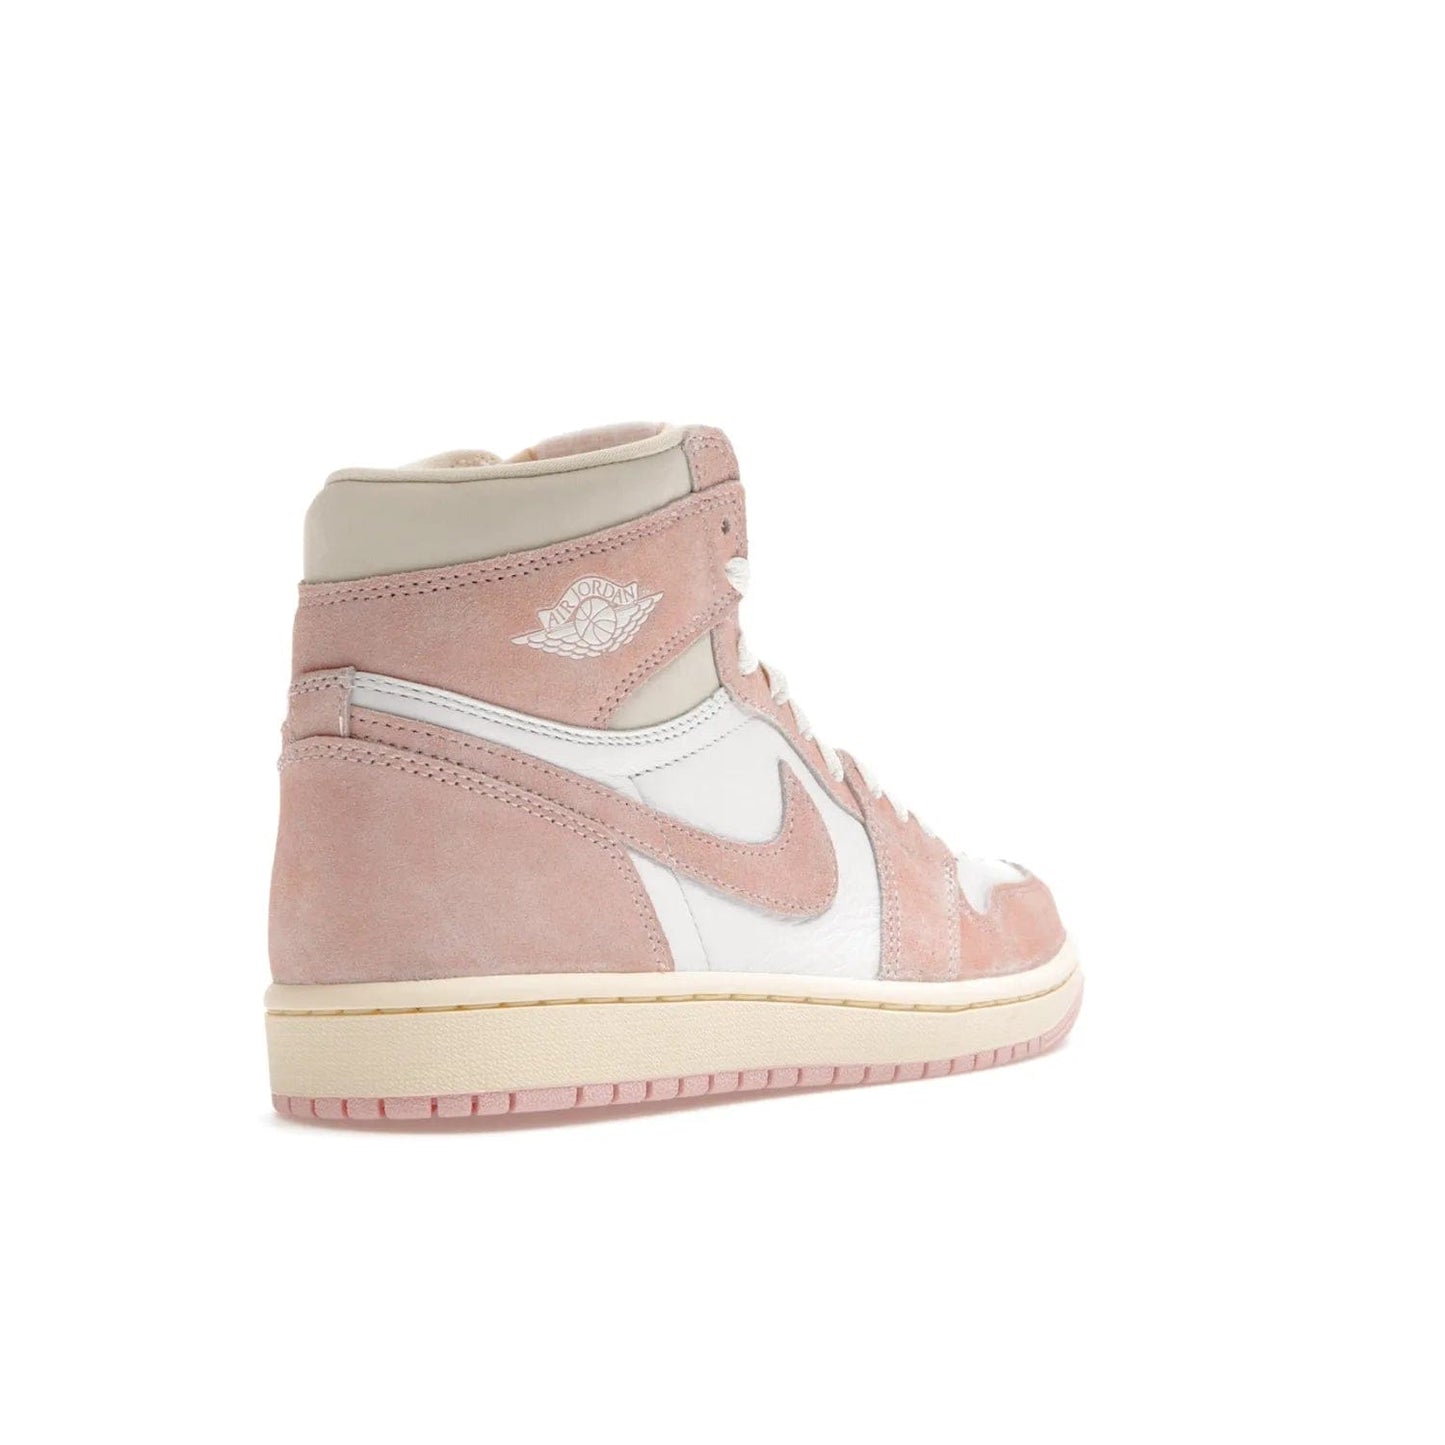 Jordan 1 Retro High OG Washed Pink (Women's) - Image 32 - Only at www.BallersClubKickz.com - Iconic Air Jordan 1 Retro High OG for women with unique pink suede and white leather uppers. Get the timeless look on April 22, 2023.